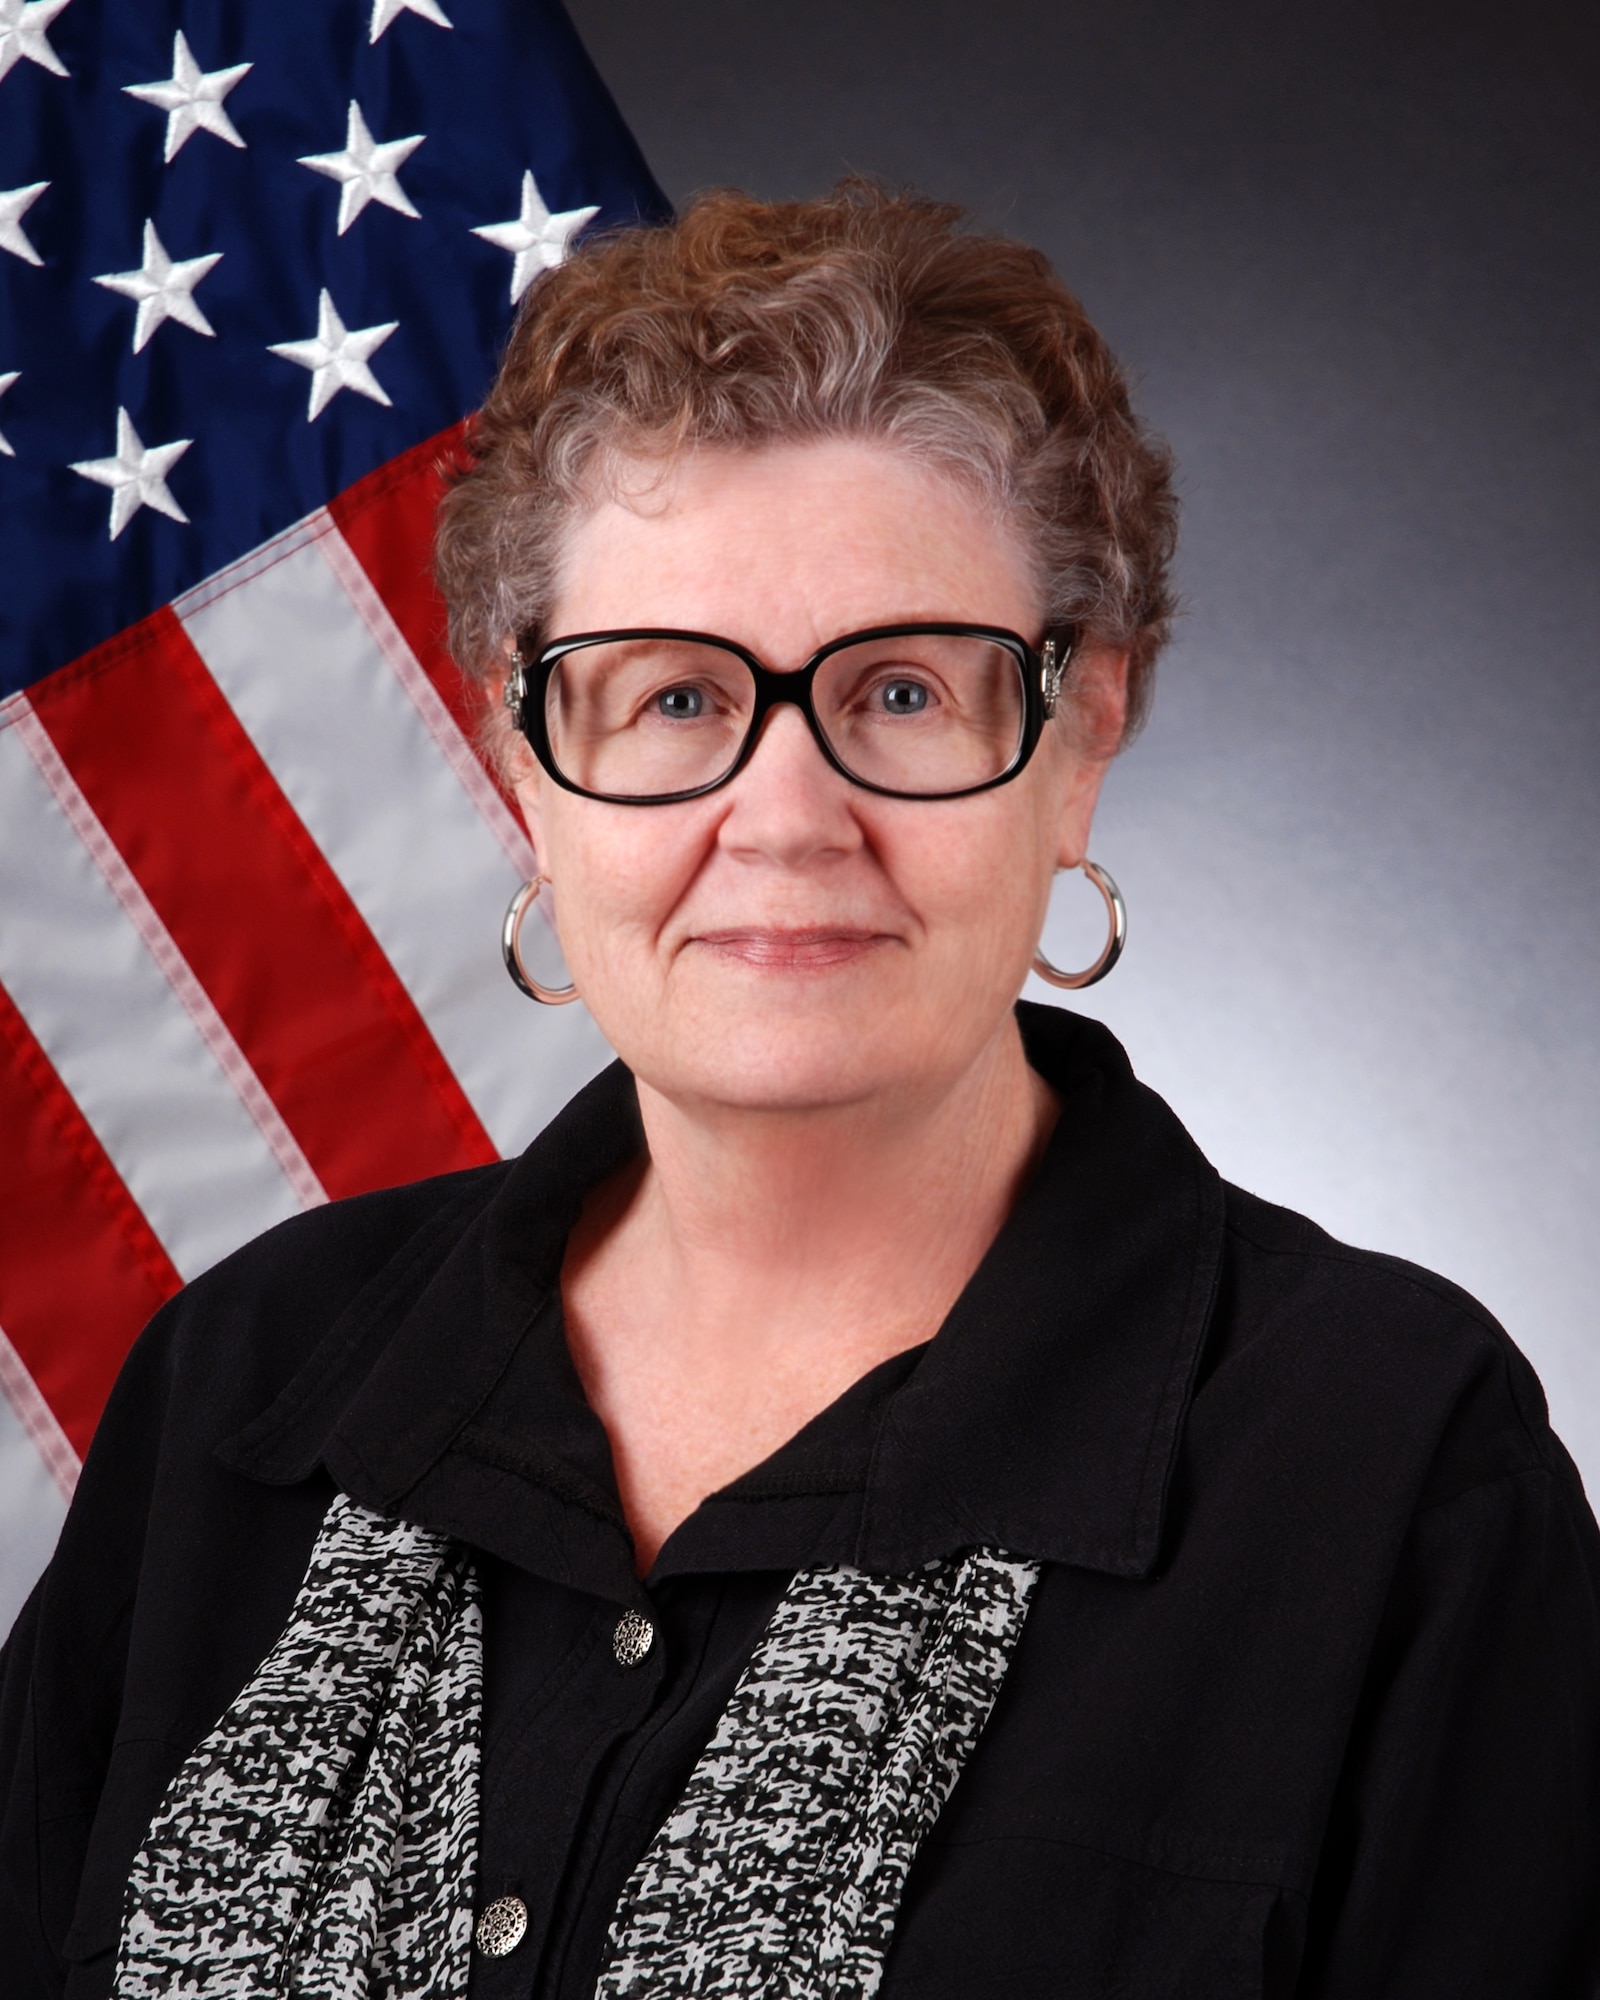 Phyllis Jeter, director of Mental Health for the 94 Airlift Wing, poses for an official photo Sept. 30, 2014, at Dobbins Air Reserve Base, Ga. Jeter is a native of south Georgia. (U.S. Air Force photo by Brad Fallin/Released)